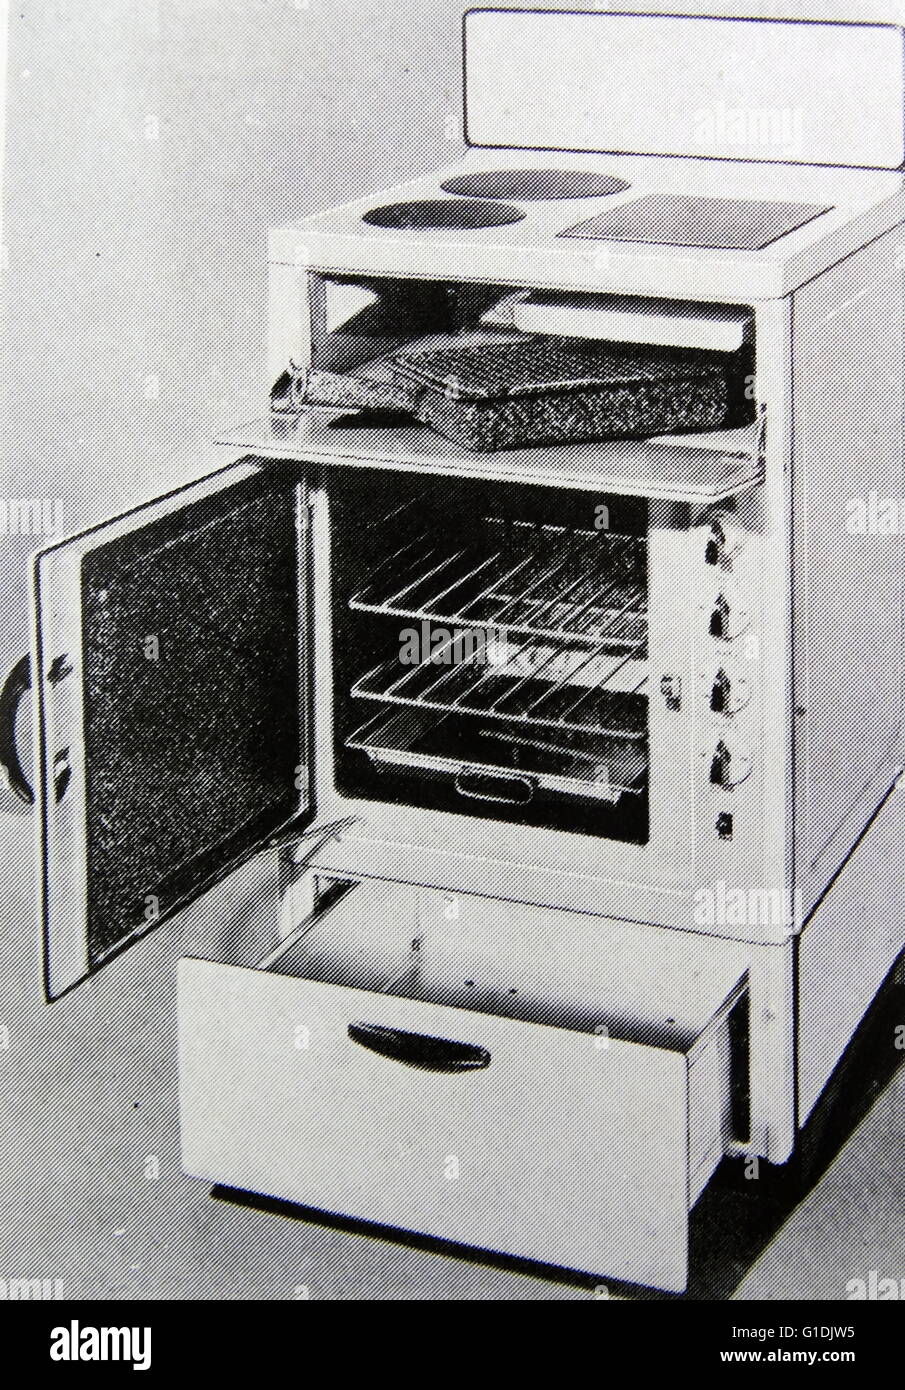 Creda electric cooker with hob and grill. British white goods in the 1950s. Stock Photo